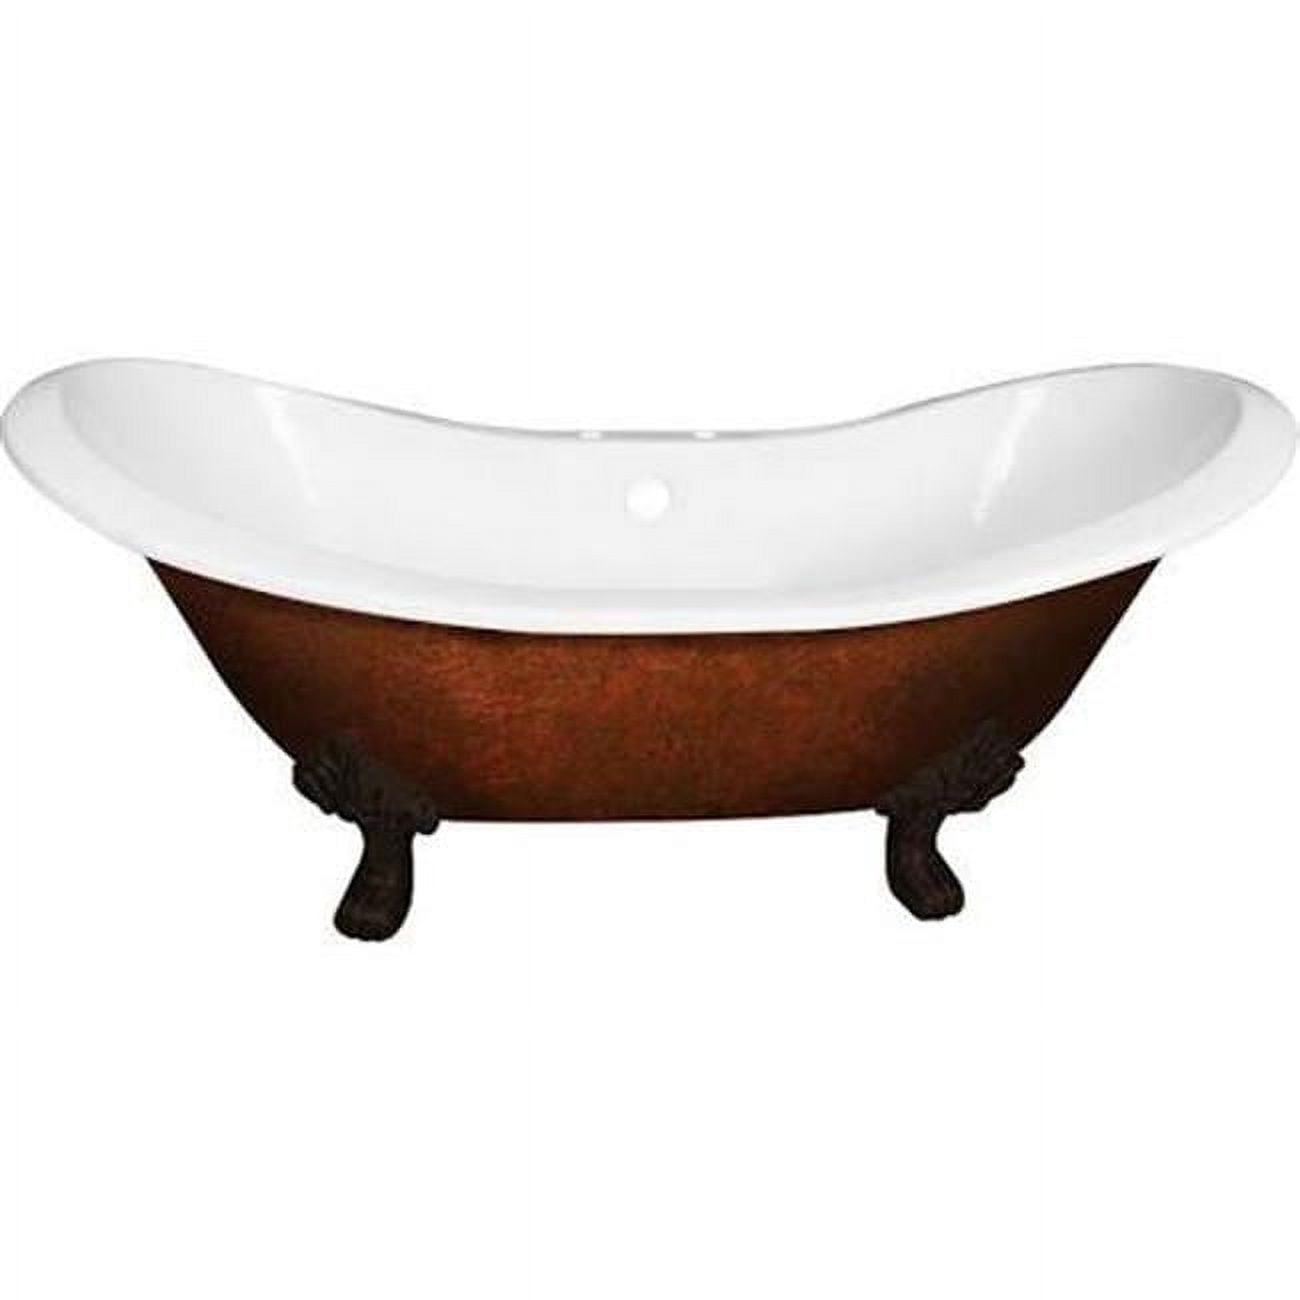 Des-dh-orb 71 X 30 In. Cast Iron Double Ended Slipper Tub With 7 In. Deck Mount Faucet Drillings & Oil Rubbed Bronze Feet